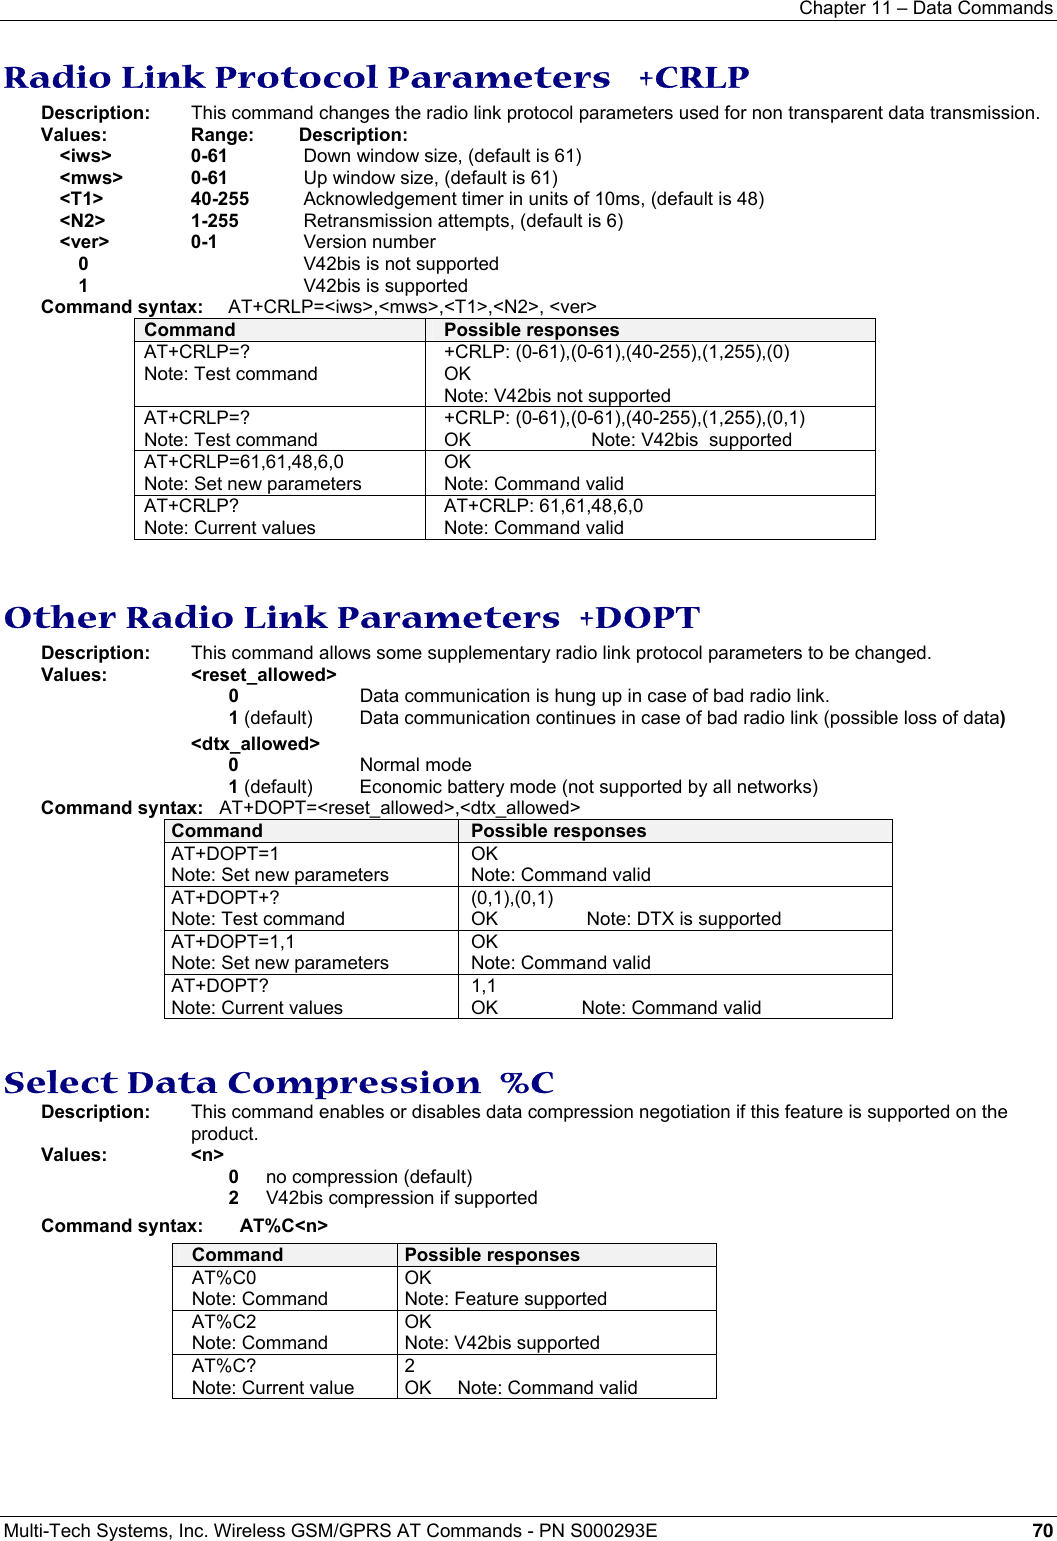 Chapter 11 – Data Commands  Multi-Tech Systems, Inc. Wireless GSM/GPRS AT Commands - PN S000293E 70  Radio Link Protocol Parameters   +CRLP Description:   This command changes the radio link protocol parameters used for non transparent data transmission.  Values:   Range:  Description: &lt;iws&gt;   0-61   Down window size, (default is 61) &lt;mws&gt;   0-61  Up window size, (default is 61) &lt;T1&gt;   40-255  Acknowledgement timer in units of 10ms, (default is 48) &lt;N2&gt; 1-255  Retransmission attempts, (default is 6) &lt;ver&gt; 0-1 Version number 0  V42bis is not supported  1  V42bis is supported Command syntax:  AT+CRLP=&lt;iws&gt;,&lt;mws&gt;,&lt;T1&gt;,&lt;N2&gt;, &lt;ver&gt; Command  Possible responses AT+CRLP=? Note: Test command +CRLP: (0-61),(0-61),(40-255),(1,255),(0) OK Note: V42bis not supported AT+CRLP=? Note: Test command +CRLP: (0-61),(0-61),(40-255),(1,255),(0,1) OK                       Note: V42bis  supported AT+CRLP=61,61,48,6,0 Note: Set new parameters OK Note: Command valid AT+CRLP? Note: Current values AT+CRLP: 61,61,48,6,0 Note: Command valid   Other Radio Link Parameters  +DOPT Description:   This command allows some supplementary radio link protocol parameters to be changed.  Values:   &lt;reset_allowed&gt;    0  Data communication is hung up in case of bad radio link. 1 (default)  Data communication continues in case of bad radio link (possible loss of data) &lt;dtx_allowed&gt; 0 Normal mode 1 (default)   Economic battery mode (not supported by all networks) Command syntax:   AT+DOPT=&lt;reset_allowed&gt;,&lt;dtx_allowed&gt; Command  Possible responses AT+DOPT=1 Note: Set new parameters  OK Note: Command valid AT+DOPT+? Note: Test command (0,1),(0,1) OK                 Note: DTX is supported AT+DOPT=1,1 Note: Set new parameters OK Note: Command valid AT+DOPT? Note: Current values 1,1 OK                Note: Command valid  Select Data Compression  %C Description:  This command enables or disables data compression negotiation if this feature is supported on the product.  Values: &lt;n&gt;   0  no compression (default) 2  V42bis compression if supported Command syntax:  AT%C&lt;n&gt; Command  Possible responses AT%C0 Note: Command OK Note: Feature supported AT%C2 Note: Command OK Note: V42bis supported AT%C? Note: Current value  2 OK     Note: Command valid  